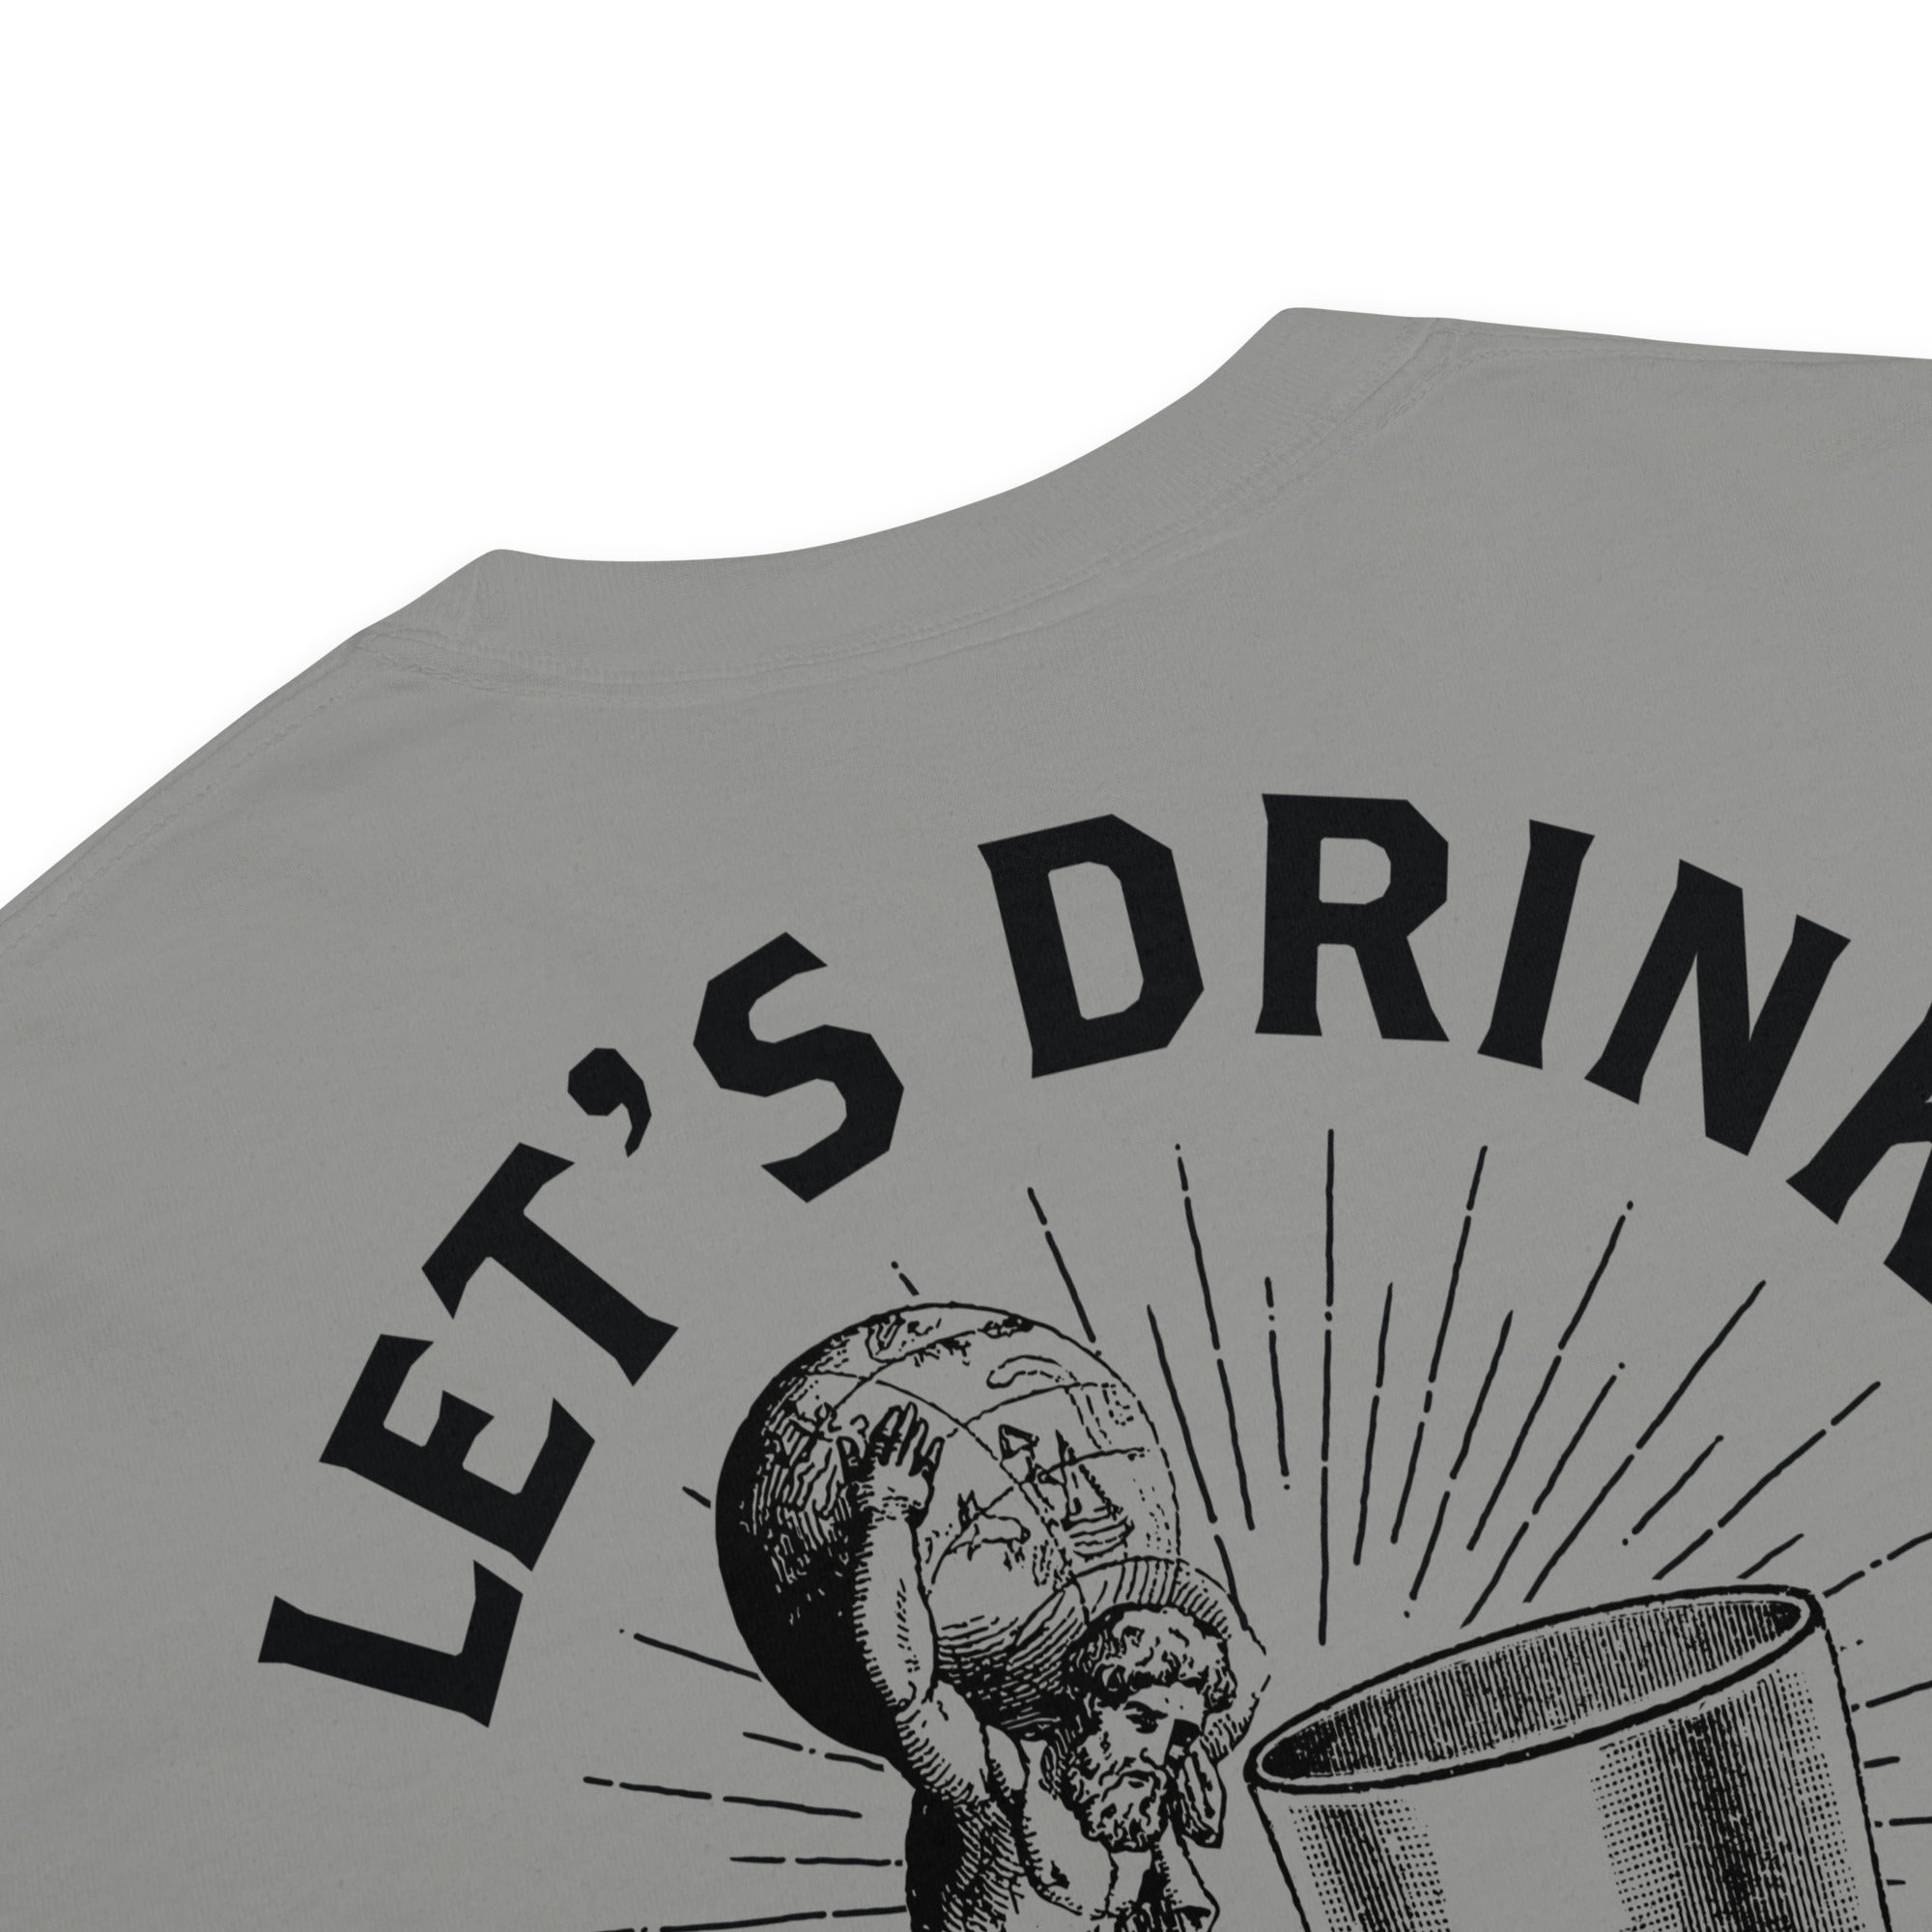 Let's Drink and Solve All the World's Problems Men’s Garment-dyed Heavyweight T-shirt